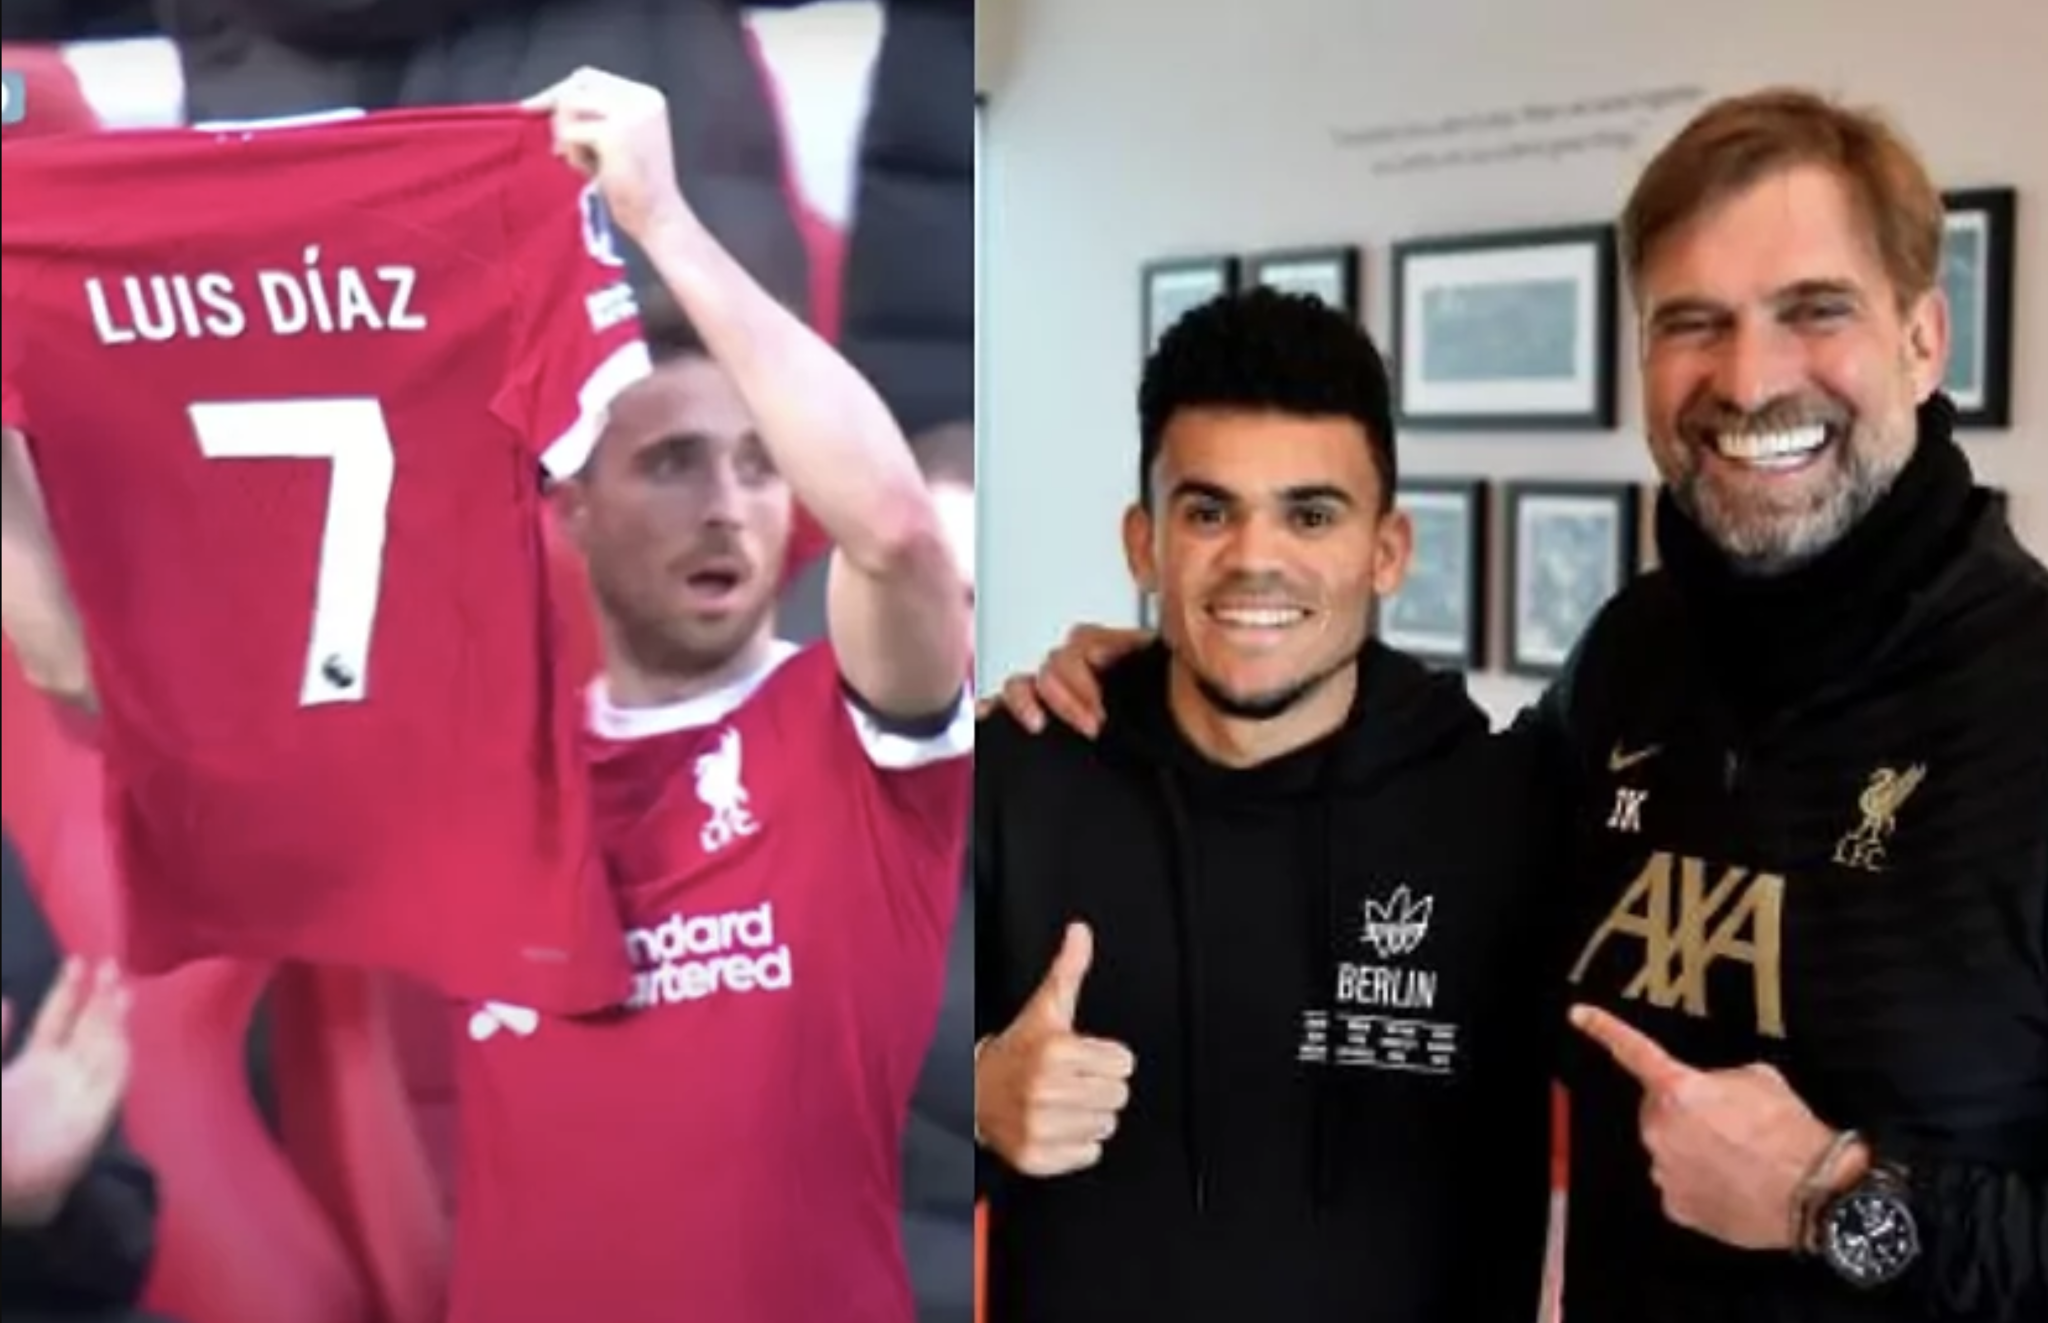 Liverpool and Jurgen Klopp show their support for Luis Diaz: We want to help, but we can't